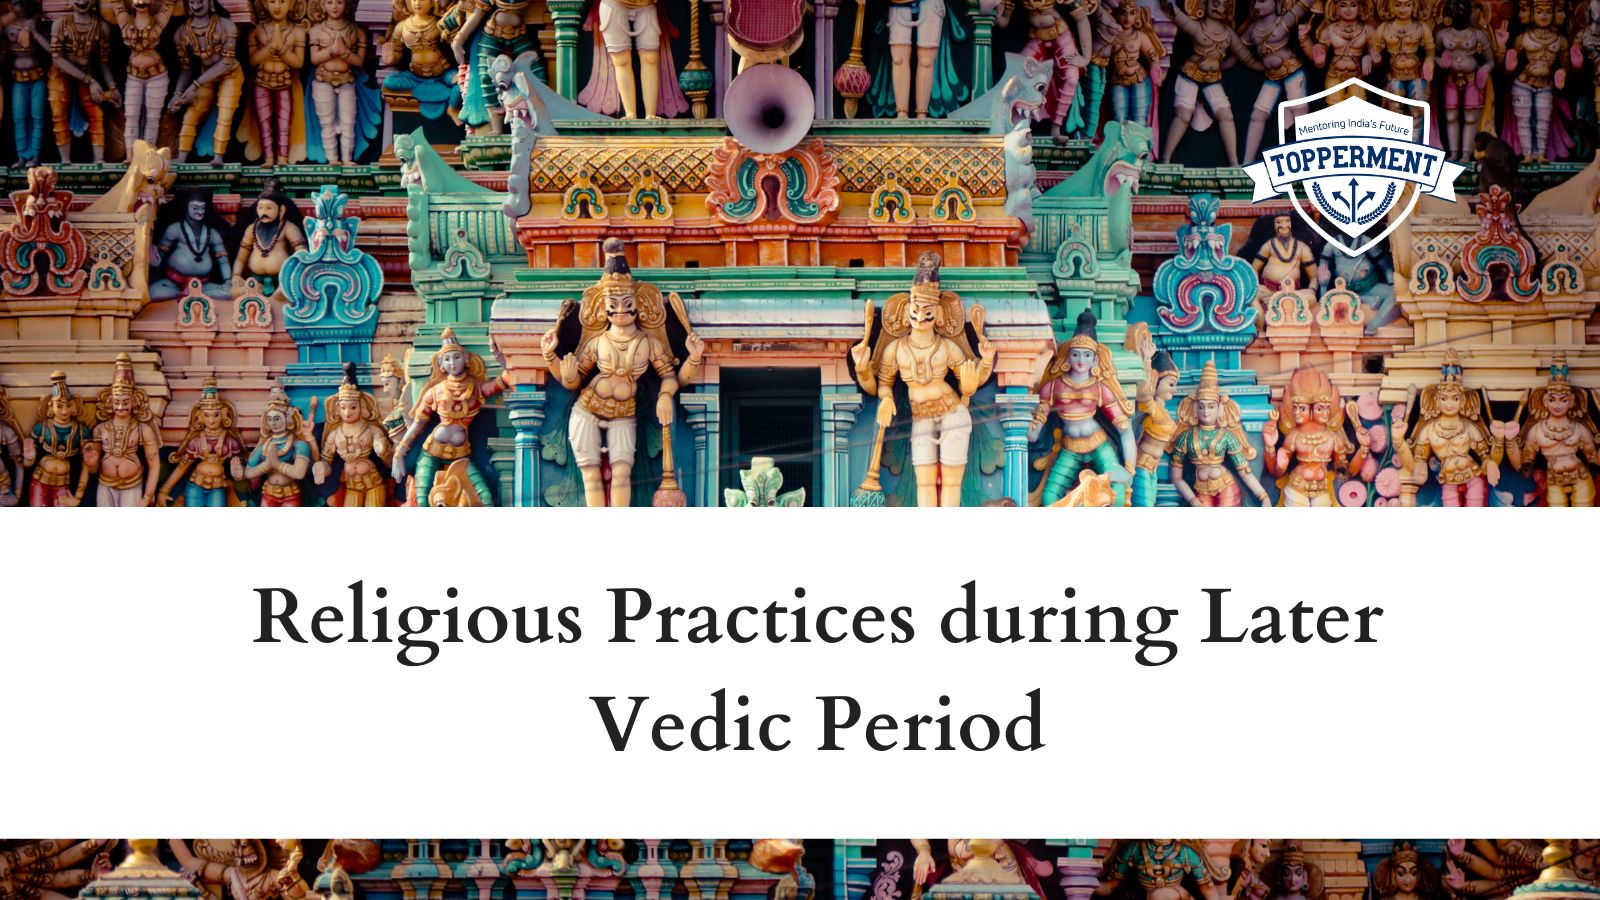 Religious-Practices-during-Later-Vedic-Period-Best-UPSC-IAS-Coaching-For-Mentoring-and-Guidance